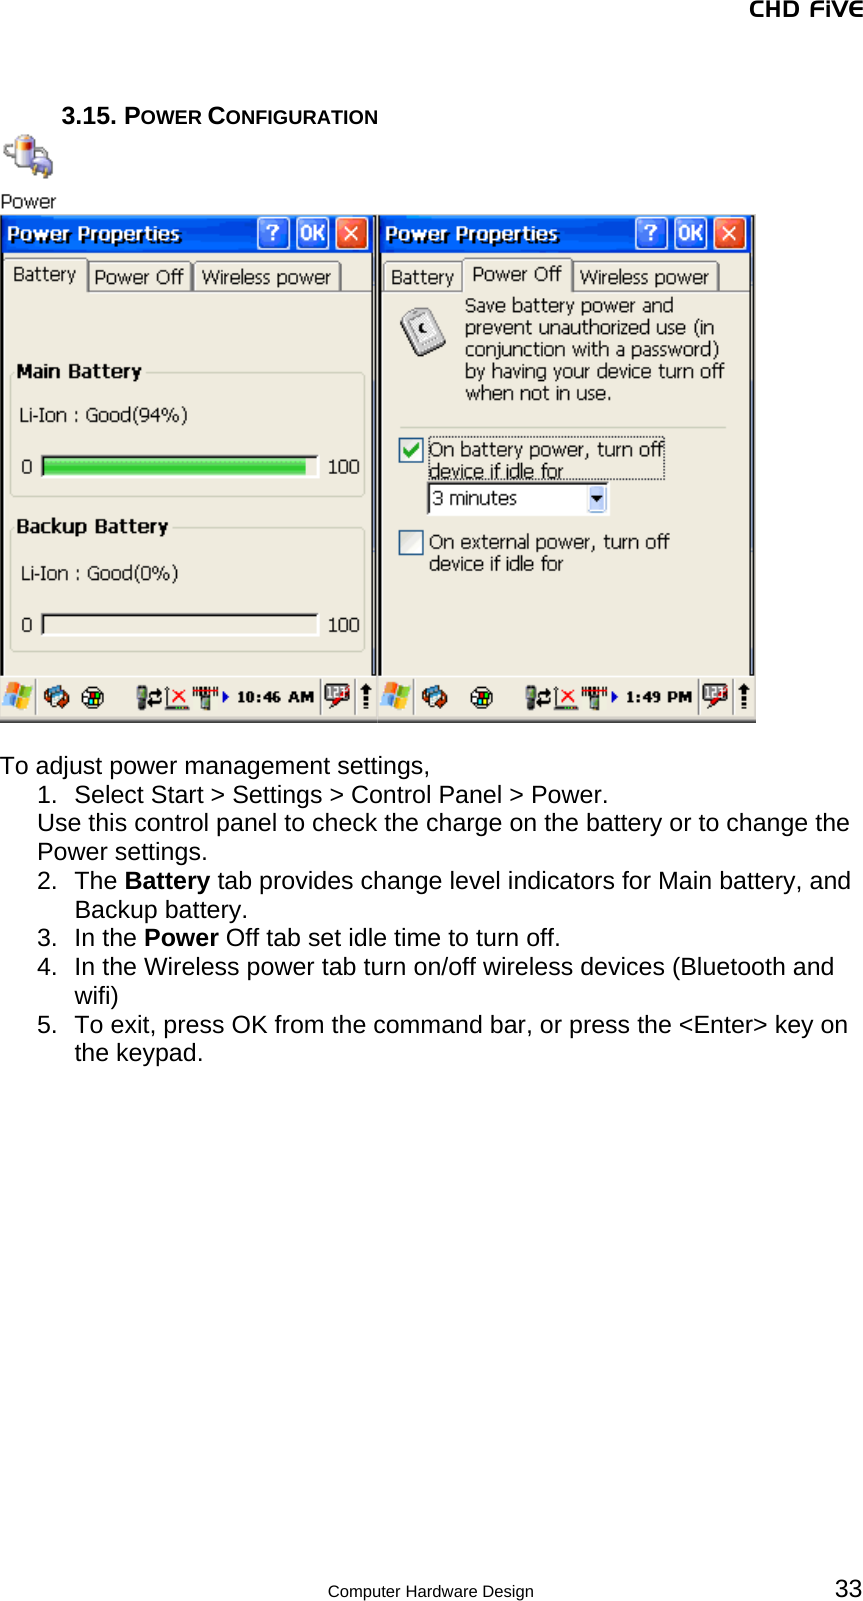 CHD FiVE  3.15. POWER CONFIGURATION    To adjust power management settings,  1.  Select Start &gt; Settings &gt; Control Panel &gt; Power.  Use this control panel to check the charge on the battery or to change the Power settings. 2. The Battery tab provides change level indicators for Main battery, and Backup battery. 3. In the Power Off tab set idle time to turn off. 4.  In the Wireless power tab turn on/off wireless devices (Bluetooth and wifi) 5.  To exit, press OK from the command bar, or press the &lt;Enter&gt; key on the keypad.     33 Computer Hardware Design